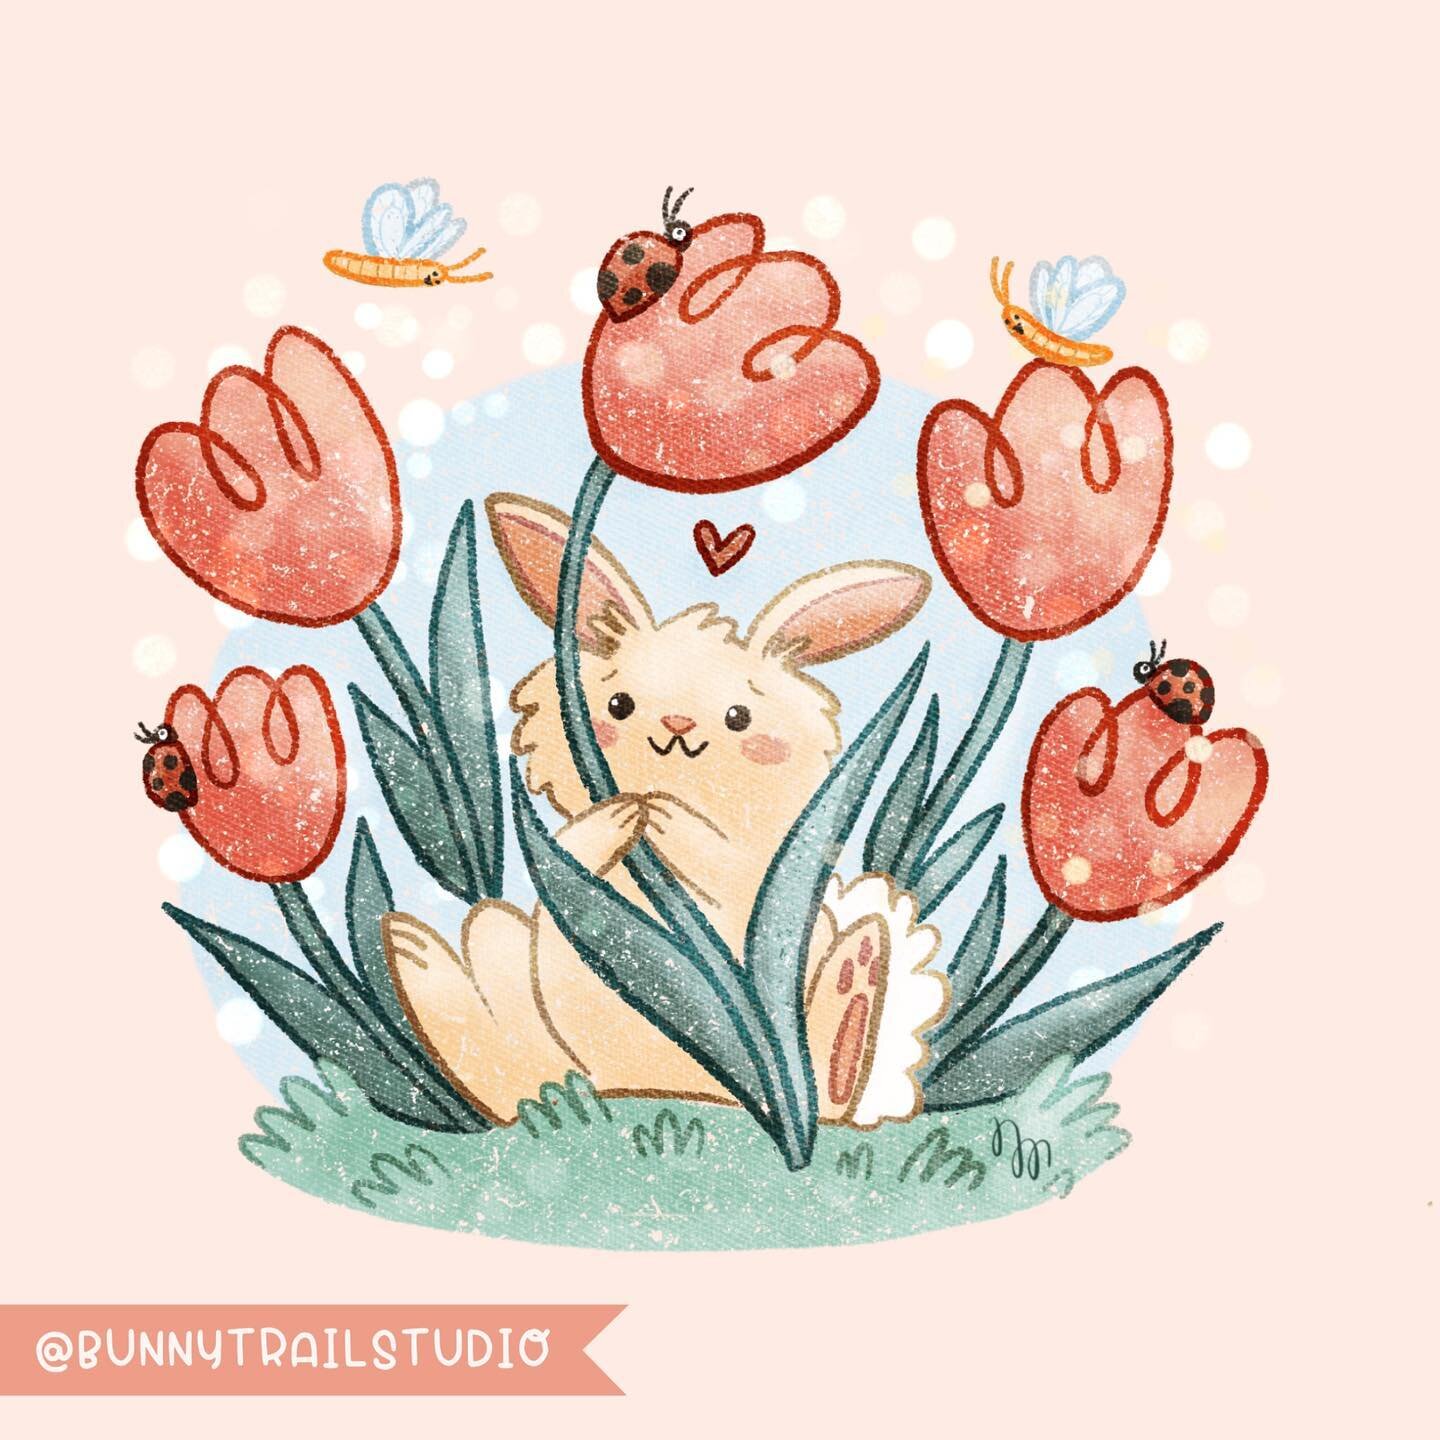 Spring is one week away!! This little bunny is excited for warmer weather and flowers! 🐰🌷
.
bunny + tulip for #marchbotanimals hosted by @bwanstudio @cheekytweethart @christysdesign @itsrainydayart @ly.s_art @zumaartstudio 
.
#marchdrawingchallenge